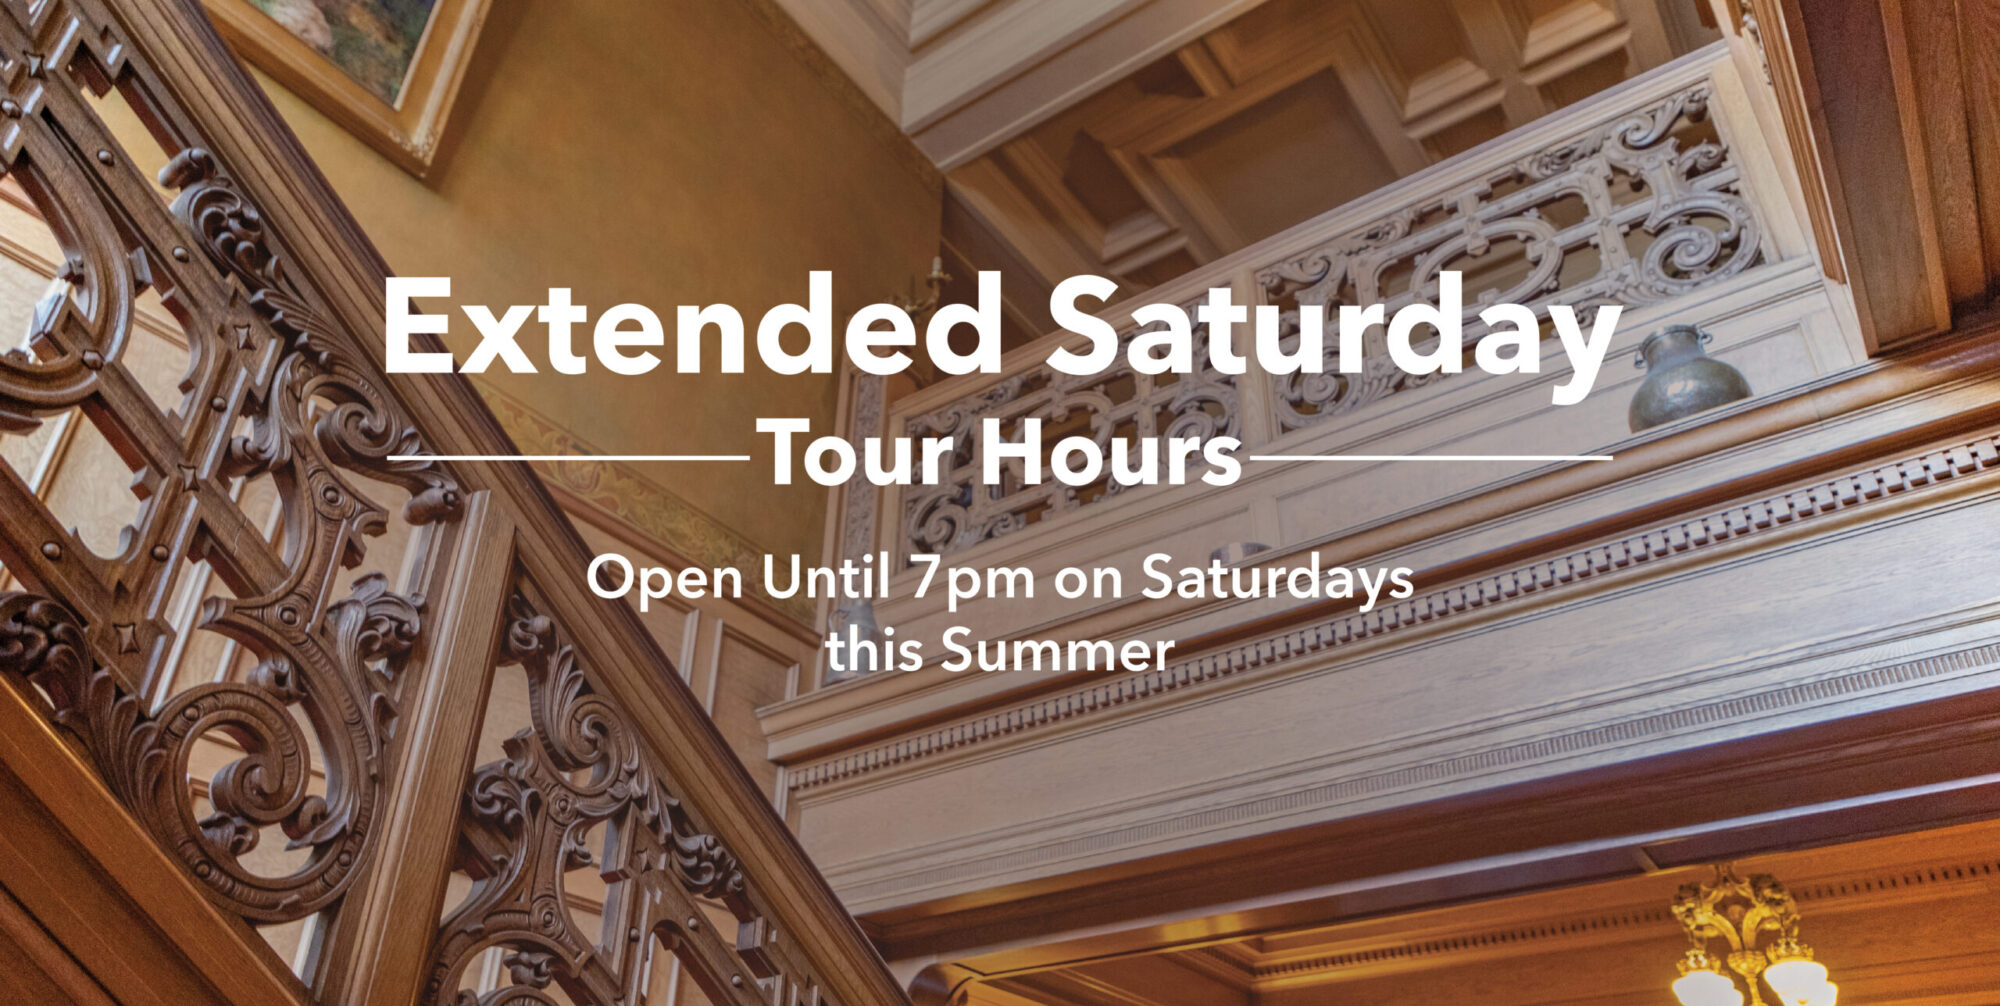 Extended Saturday Tour Hours: Open until 7pm on Saturdays this Summer. Background is wooden railing leading up to a second floor.